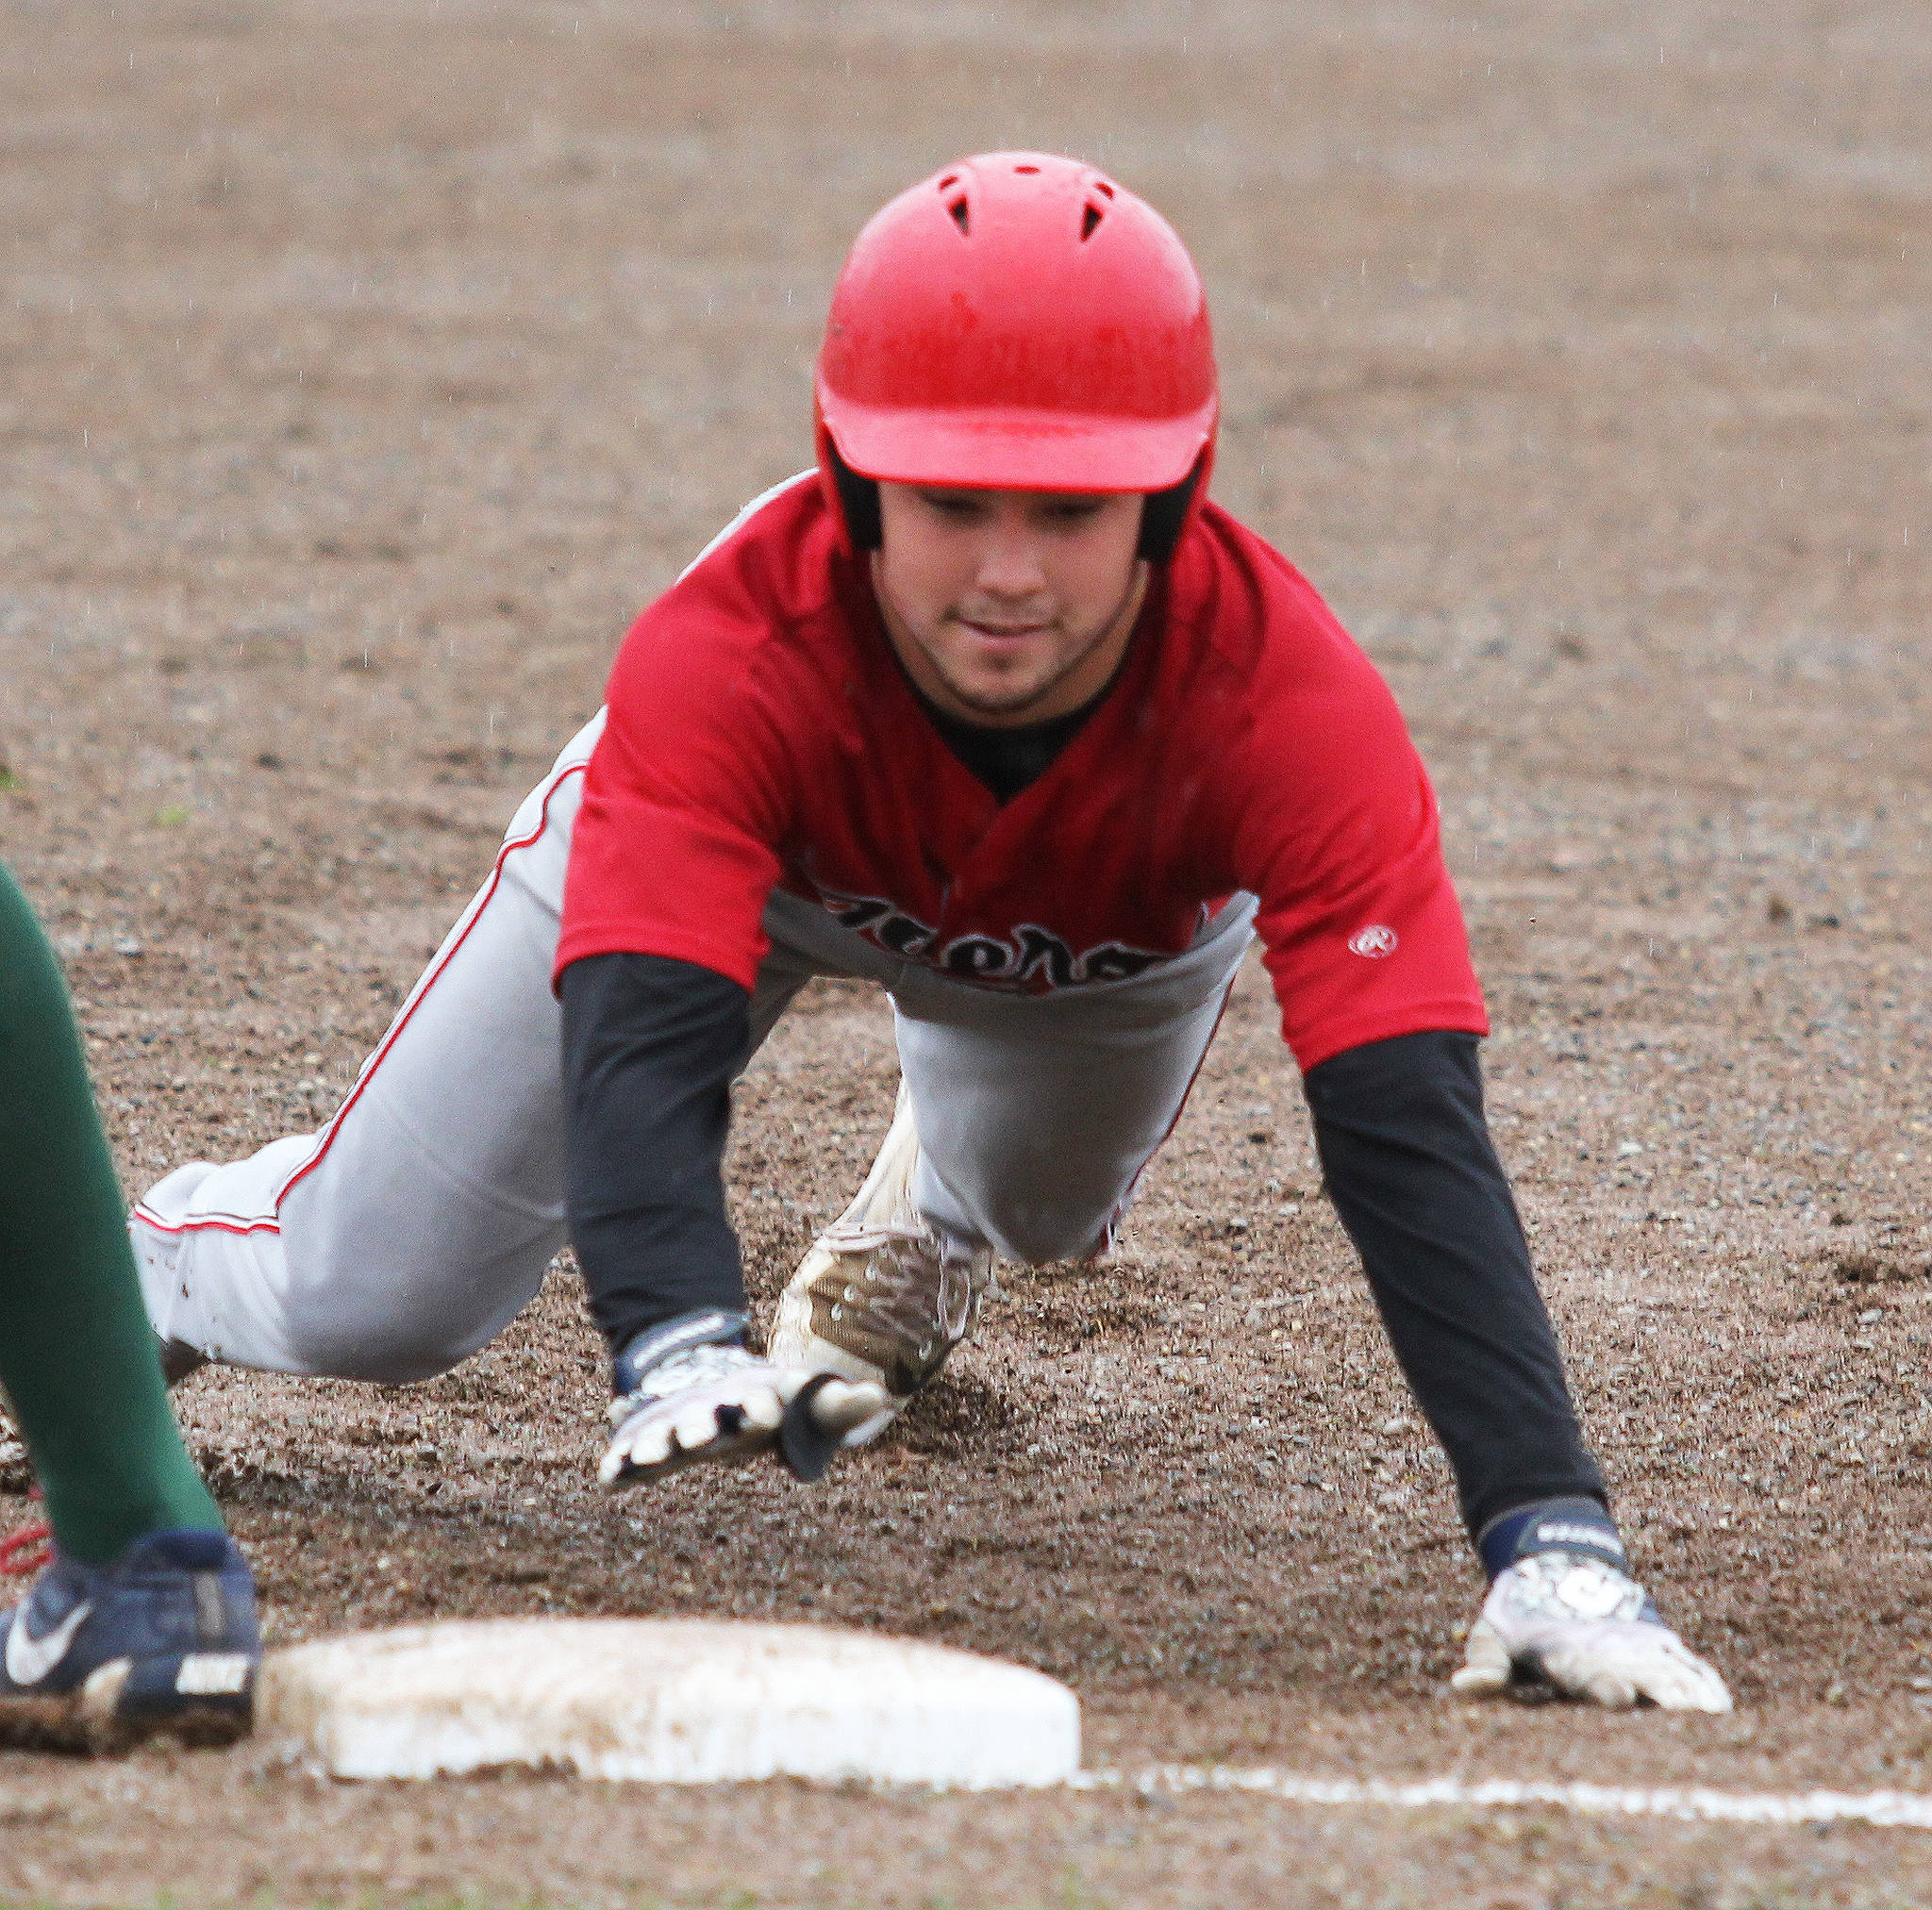 Peninsula infielder Paul Kunst slides back into first during a 3-1 loss ot Mat-Su in the first game of a best-of-3 semifinal series Wednesday at Hermon Brothers Field in Palmer. (Photo by Jeremiah Bartz/Mat-Su Frontiersman)